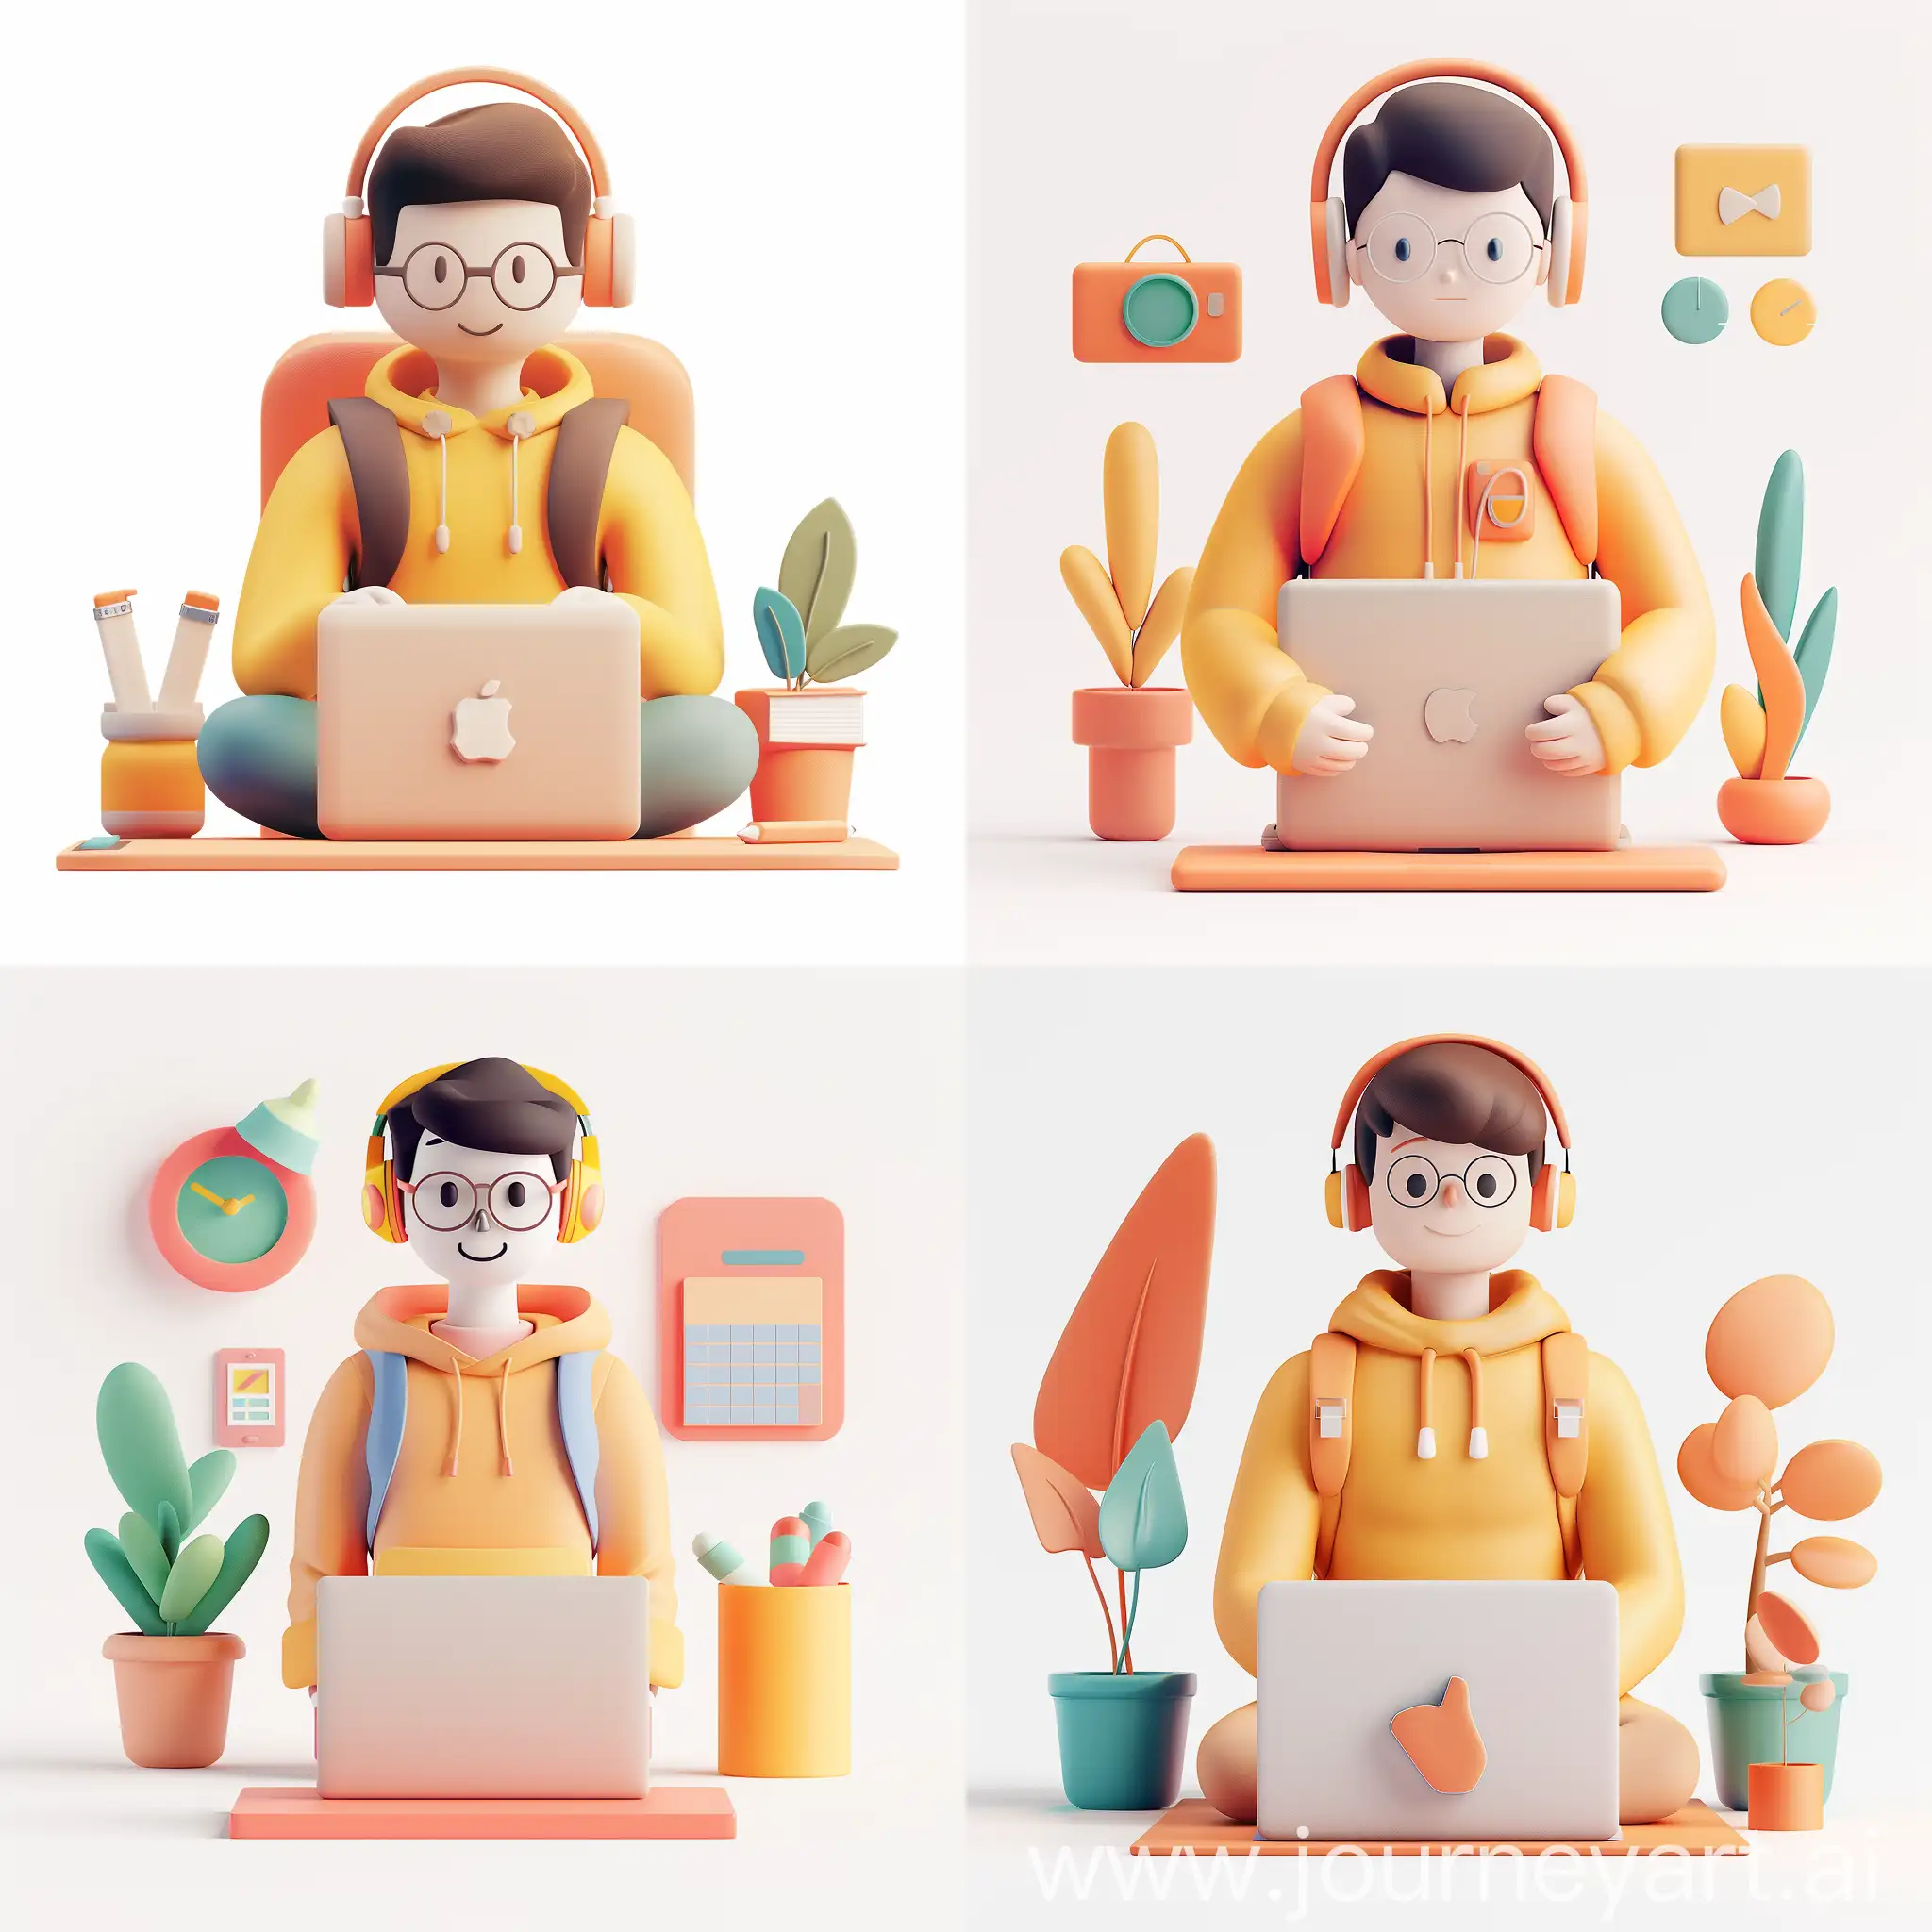 Minimalist-3D-UI-Illustration-of-a-Programmer-Student-in-Soft-Abstract-Style